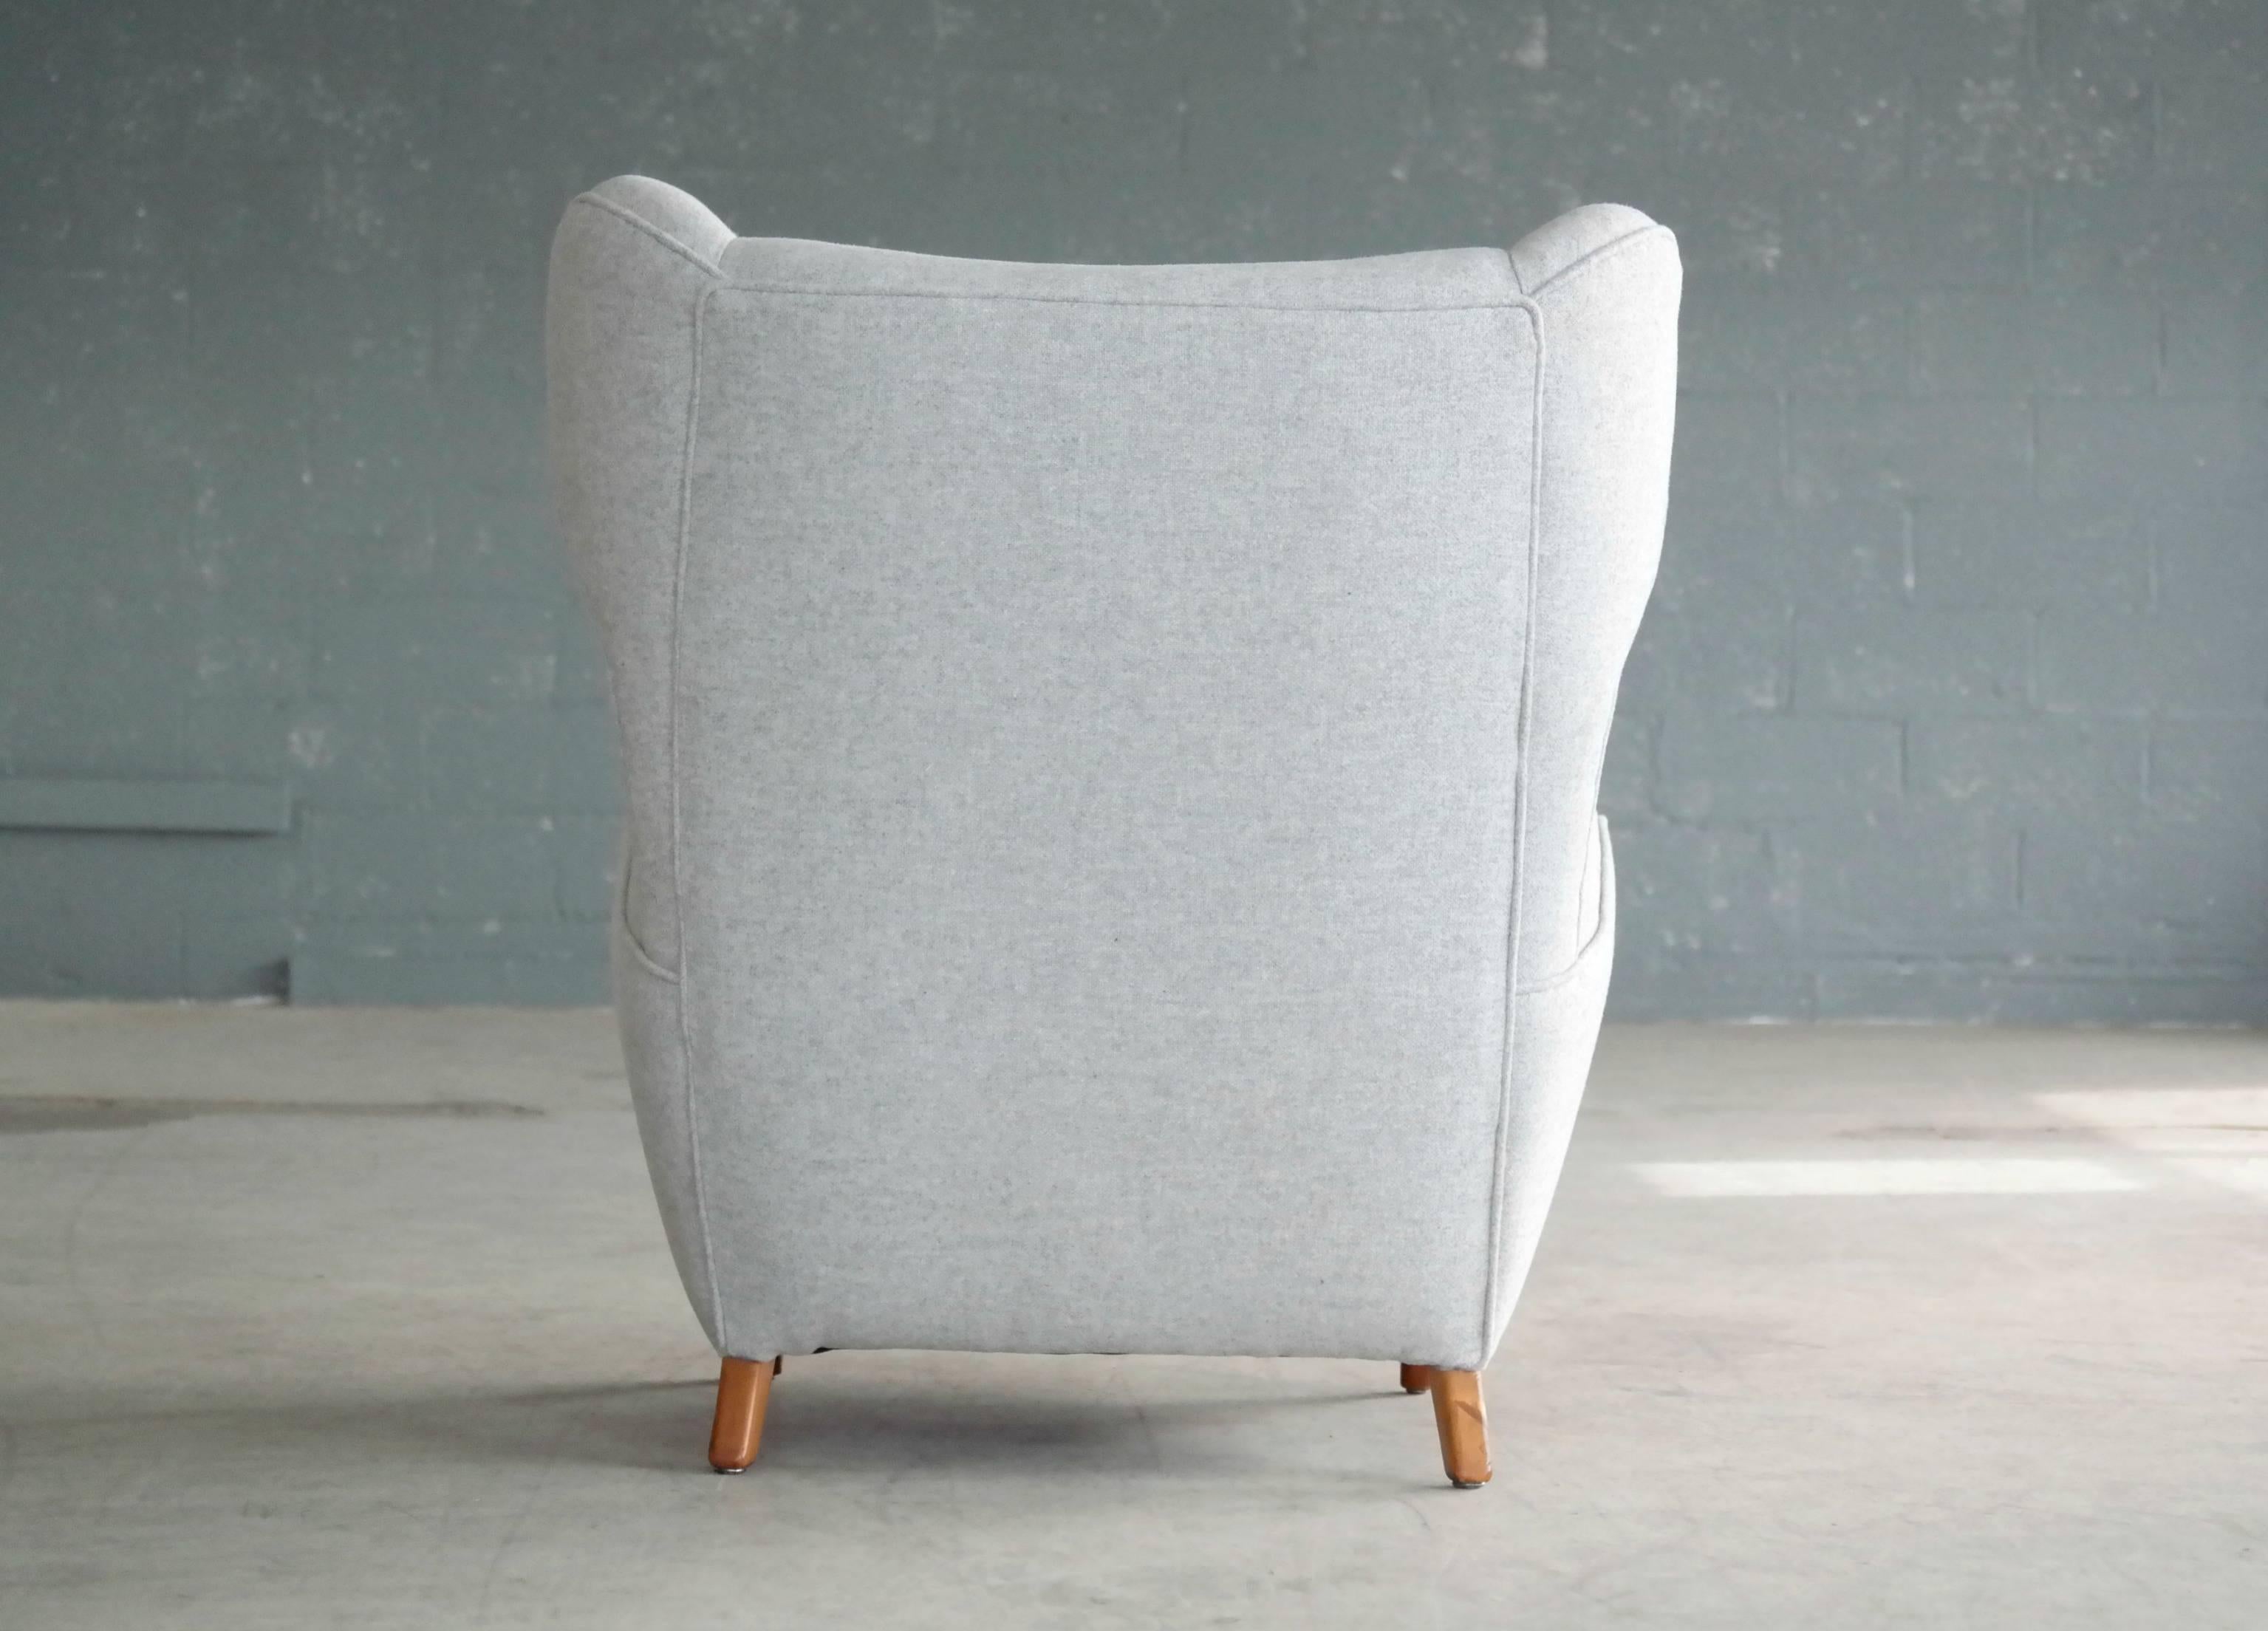 Mid-20th Century Gio Ponti Style Midcentury Lounge Chair Re-Upholstered in Kvadrat Wool